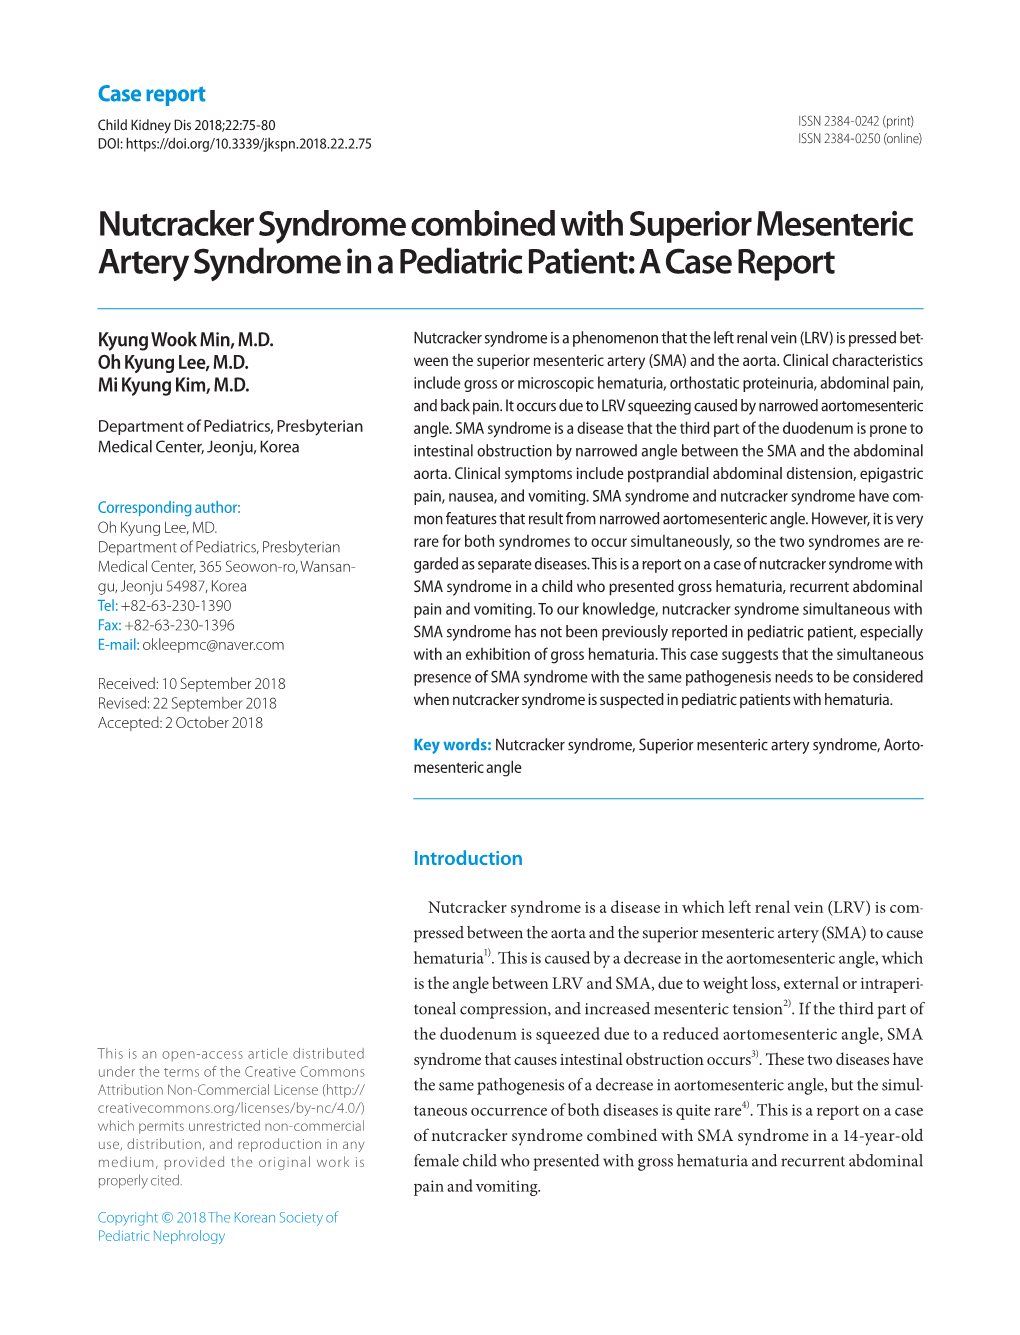 Nutcracker Syndrome Combined with Superior Mesenteric Artery Syndrome in a Pediatric Patient: a Case Report